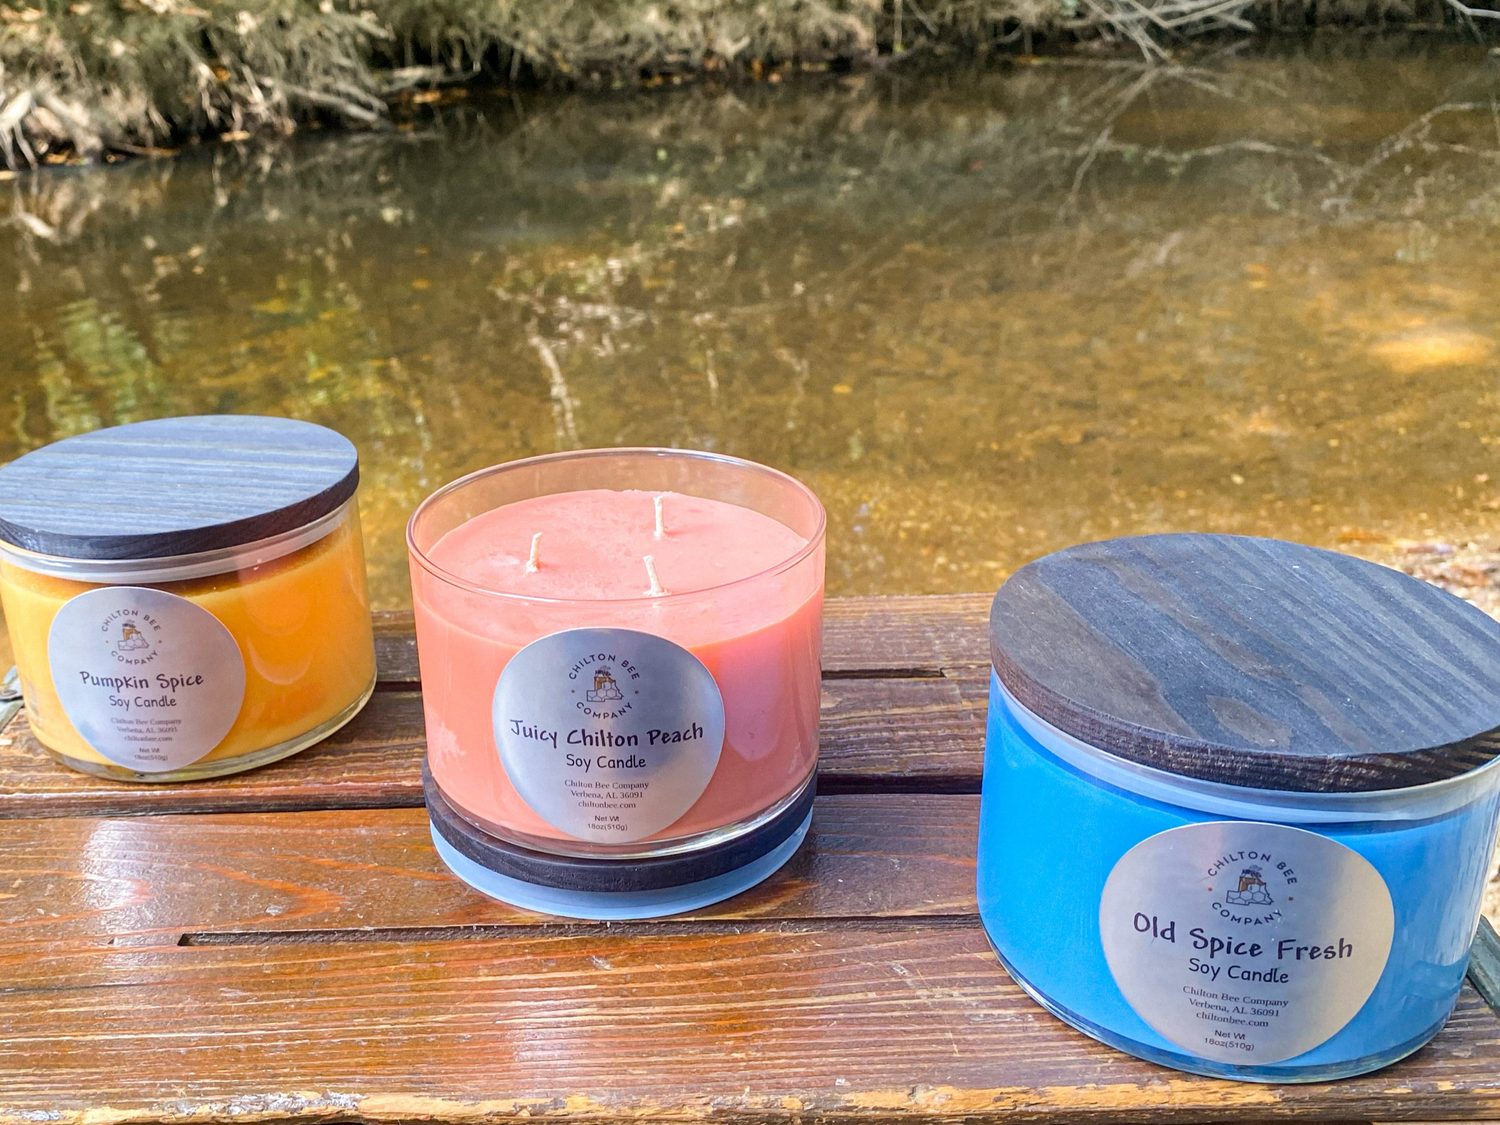 3 Wick Soy Candle Natural Soy Wax - Chilton bee company 